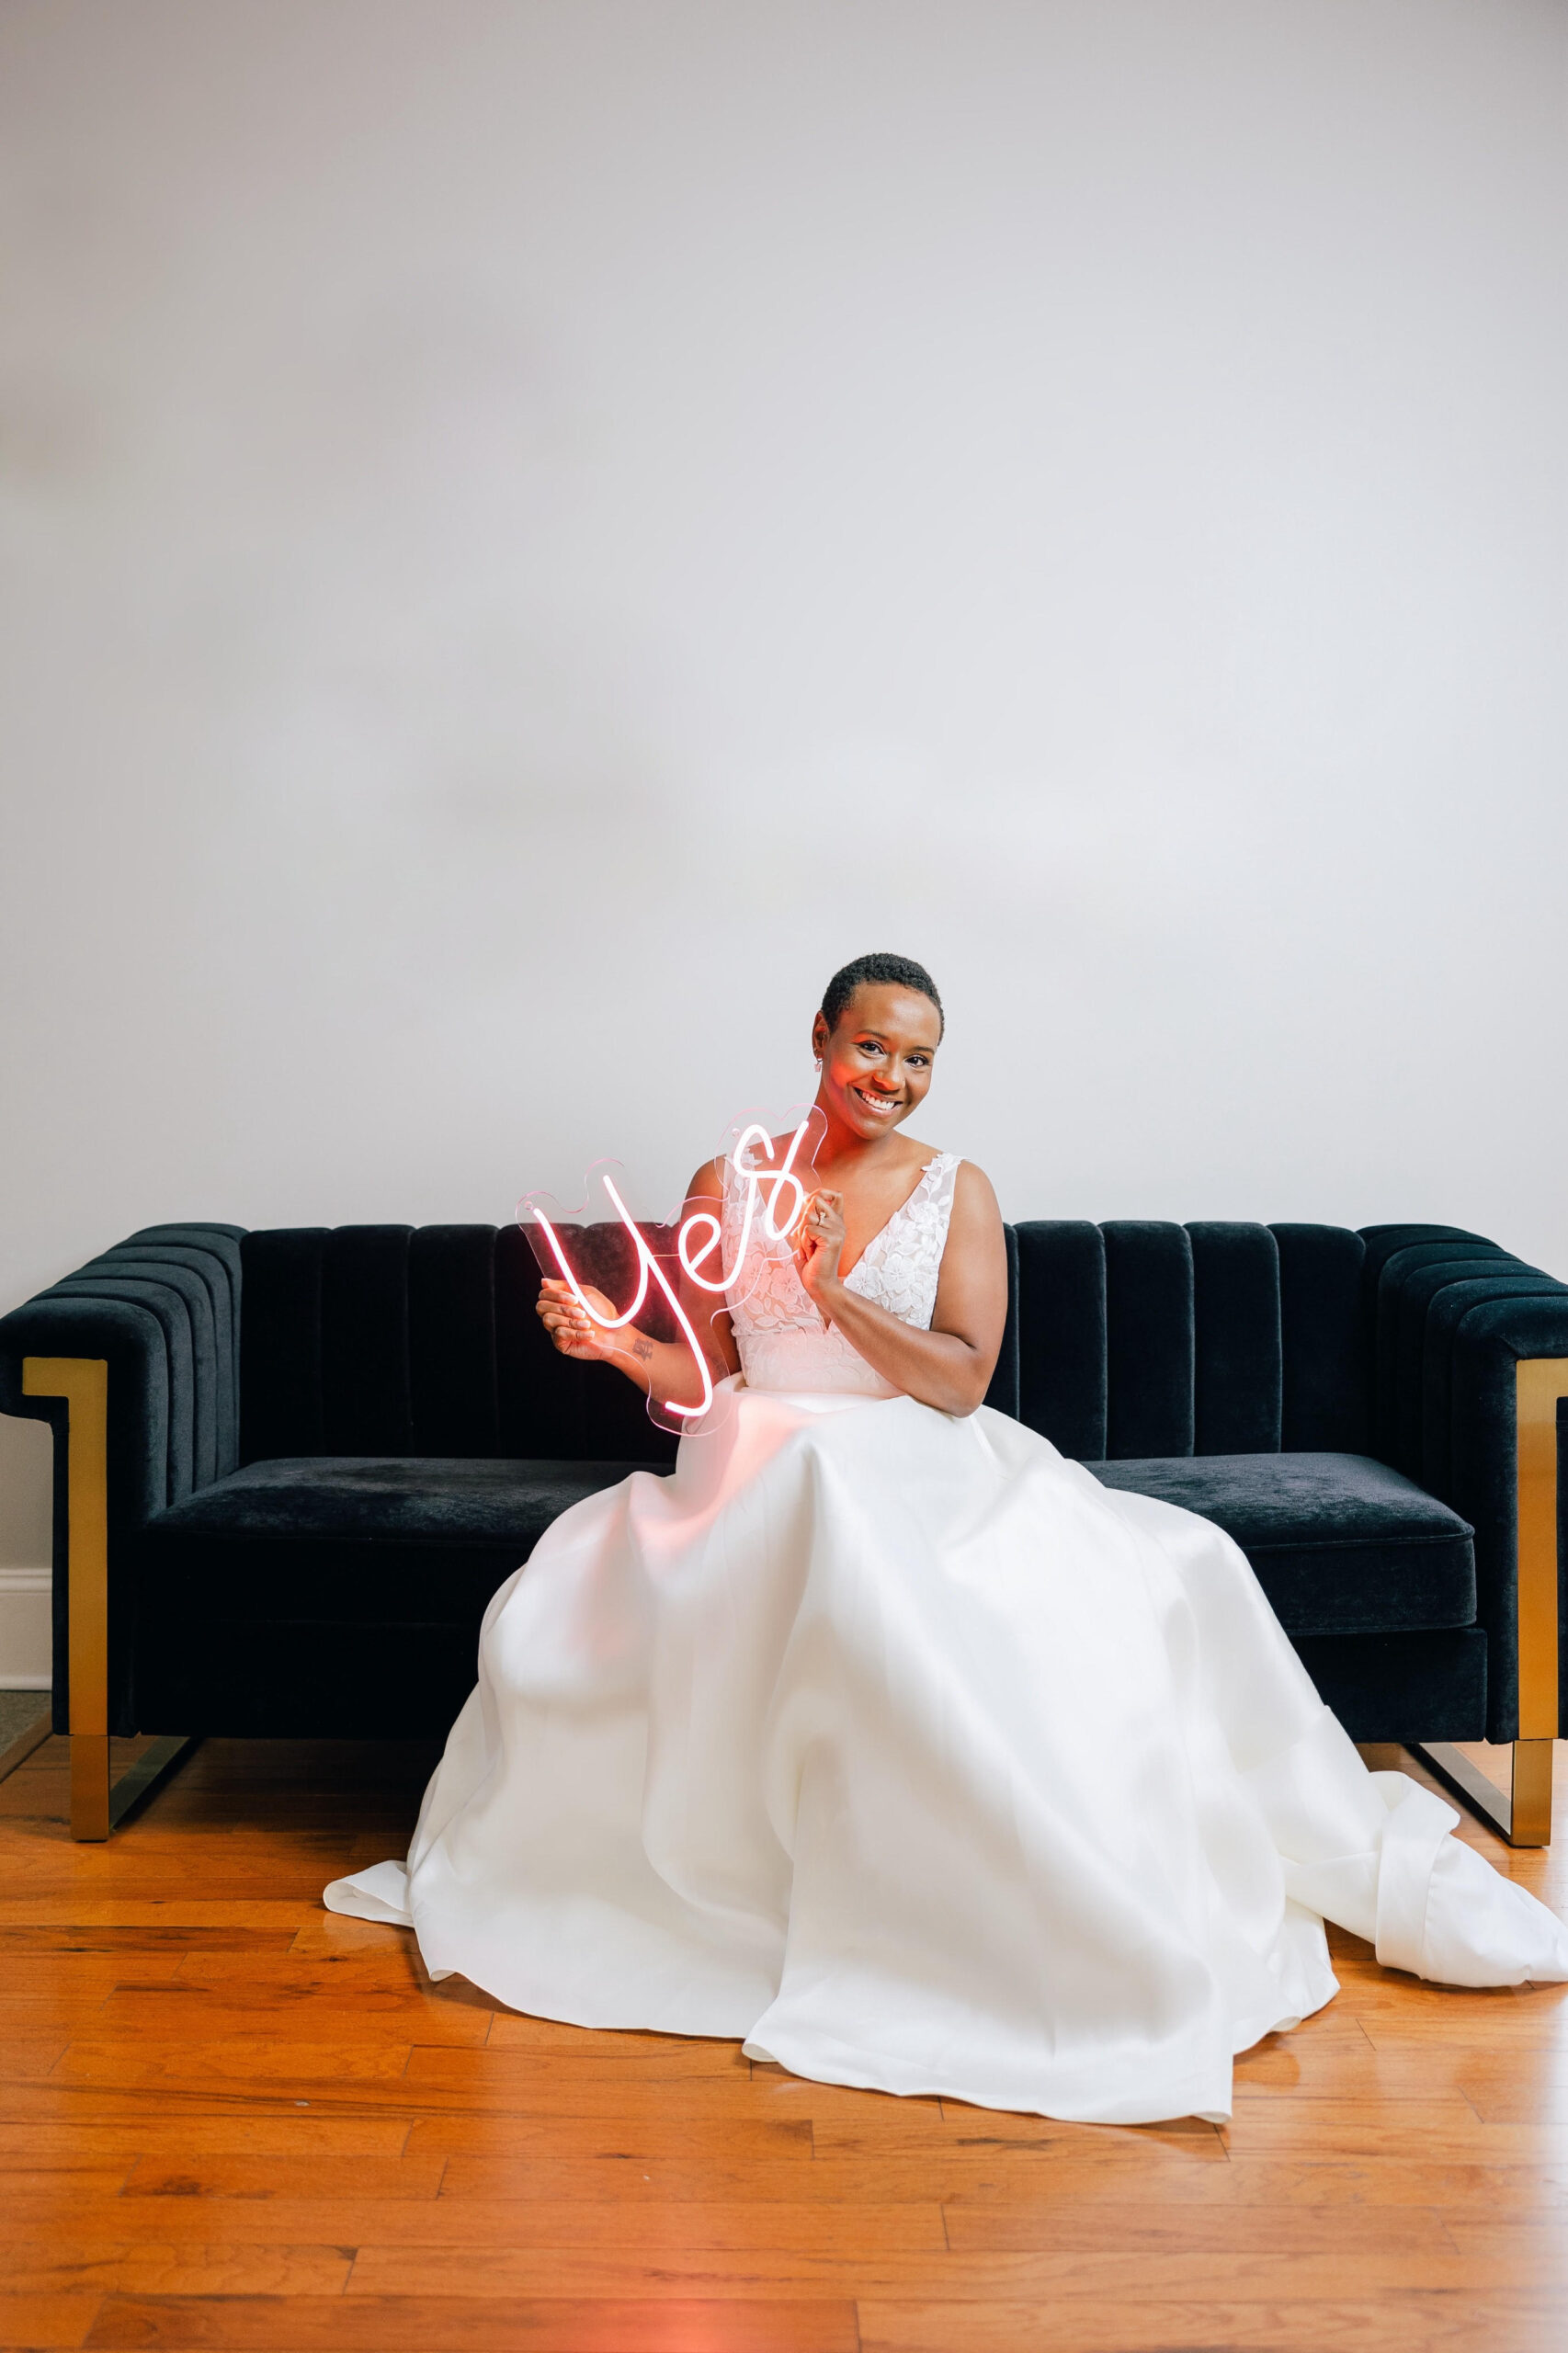 bride sitting on black couch smiling in her wedding gown holding a neon sign that says "Yes"